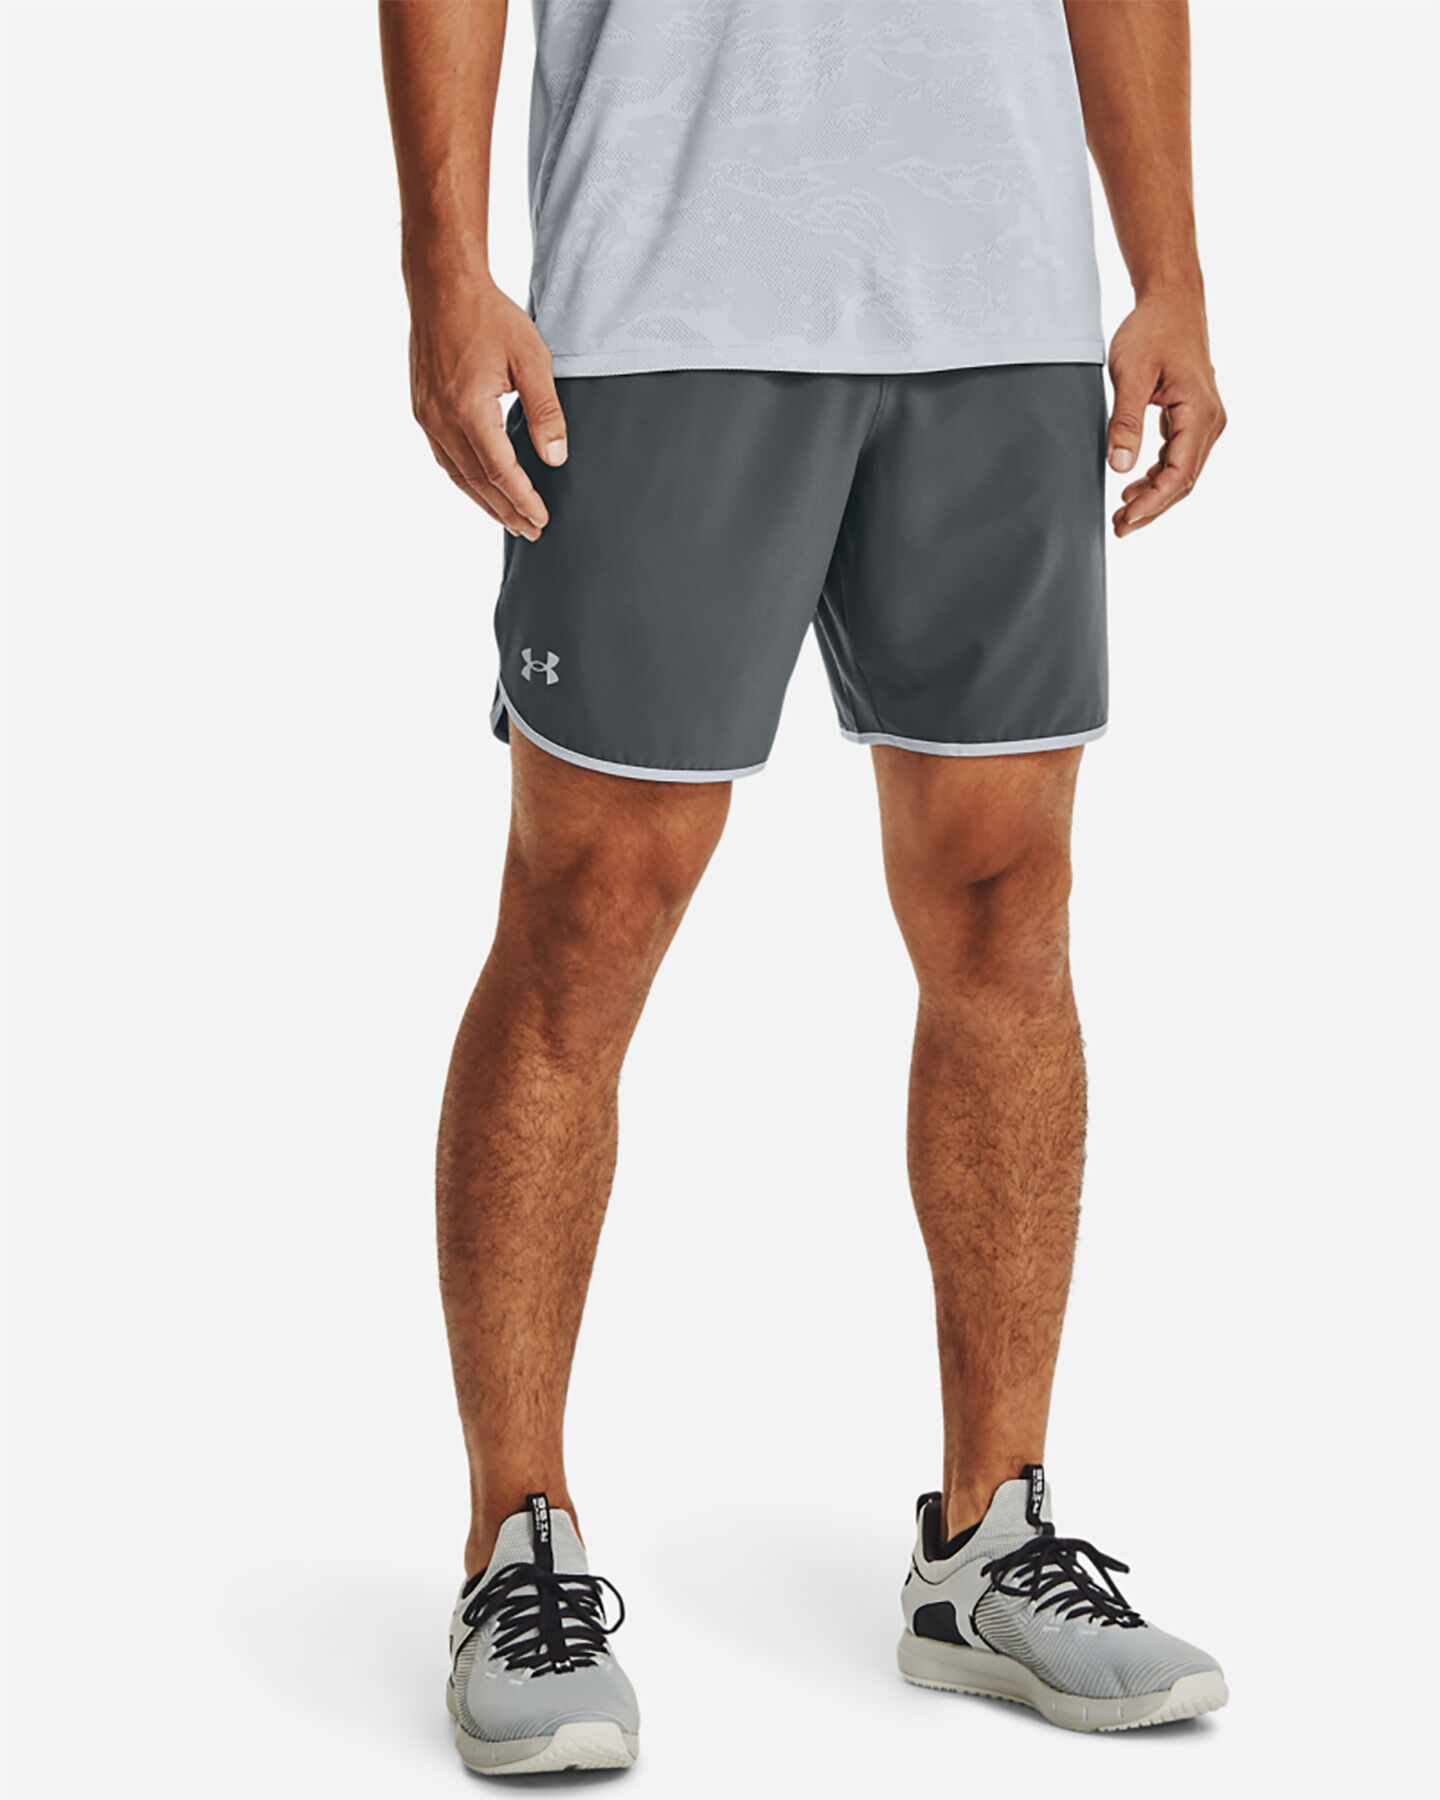  Pantalone training UNDER ARMOUR HIIT WOVEN M S5287183 scatto 2